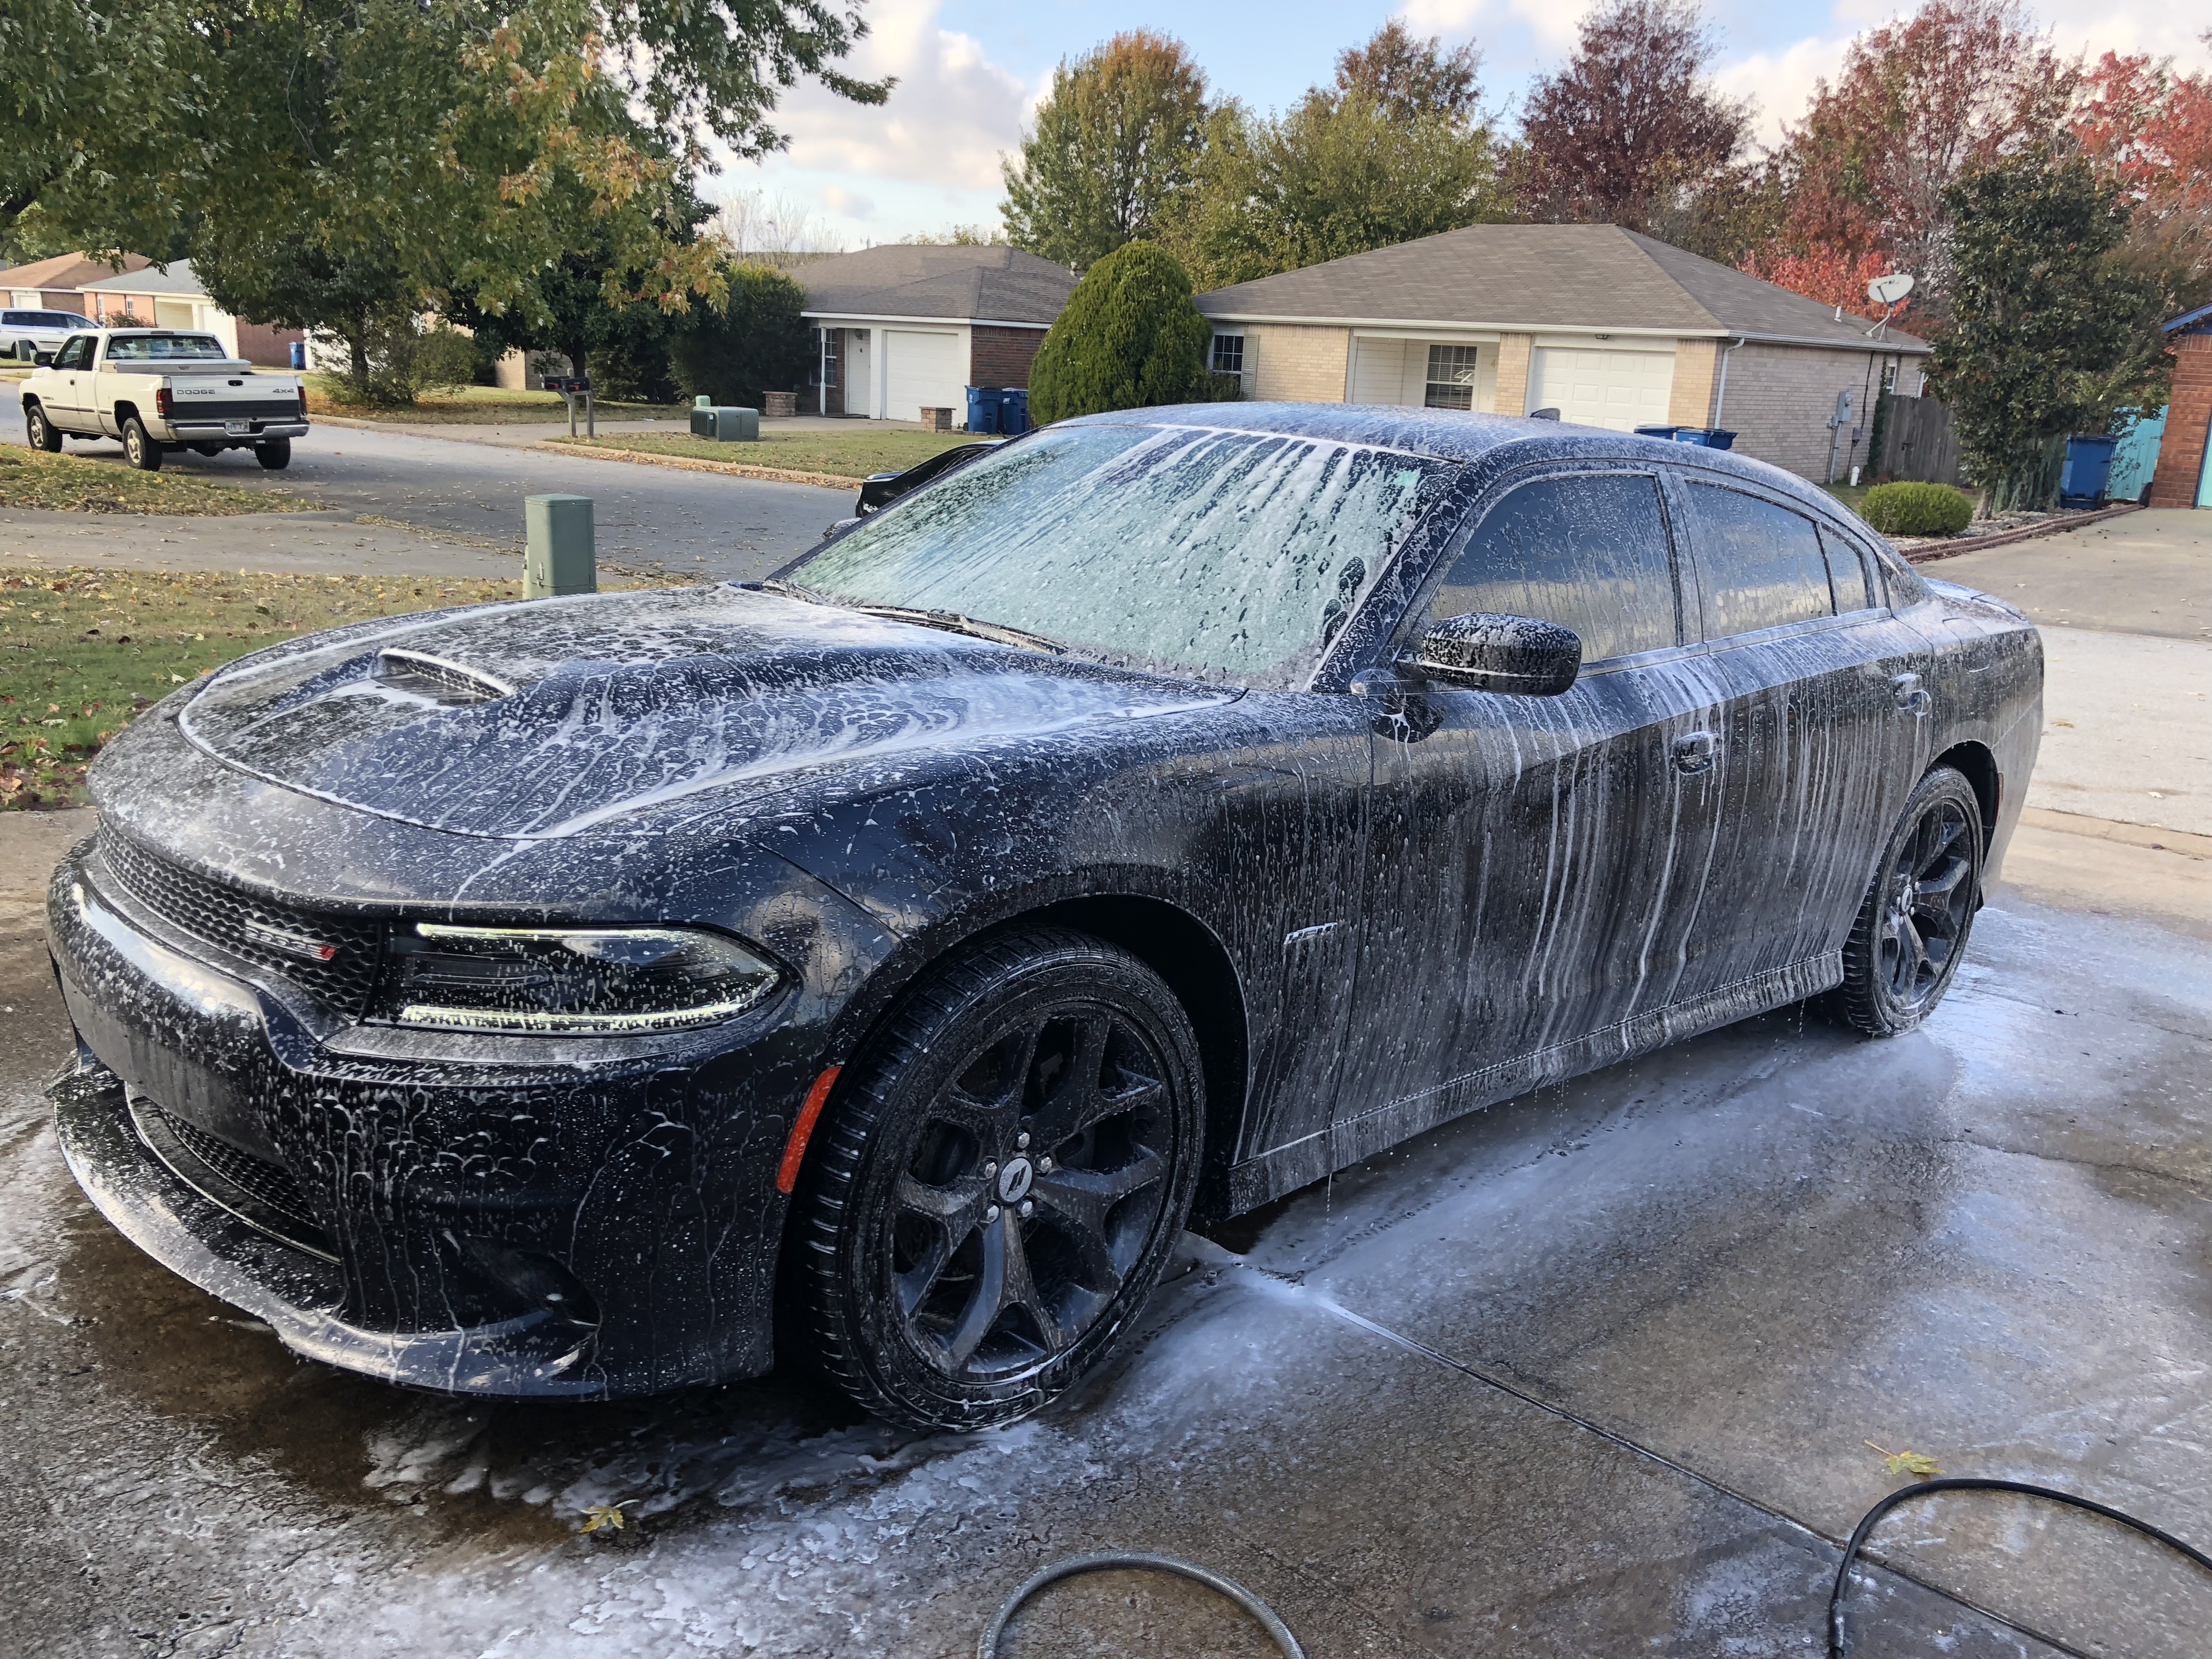 We are foaming up this black Dodge Charger in Bentonville, AR.